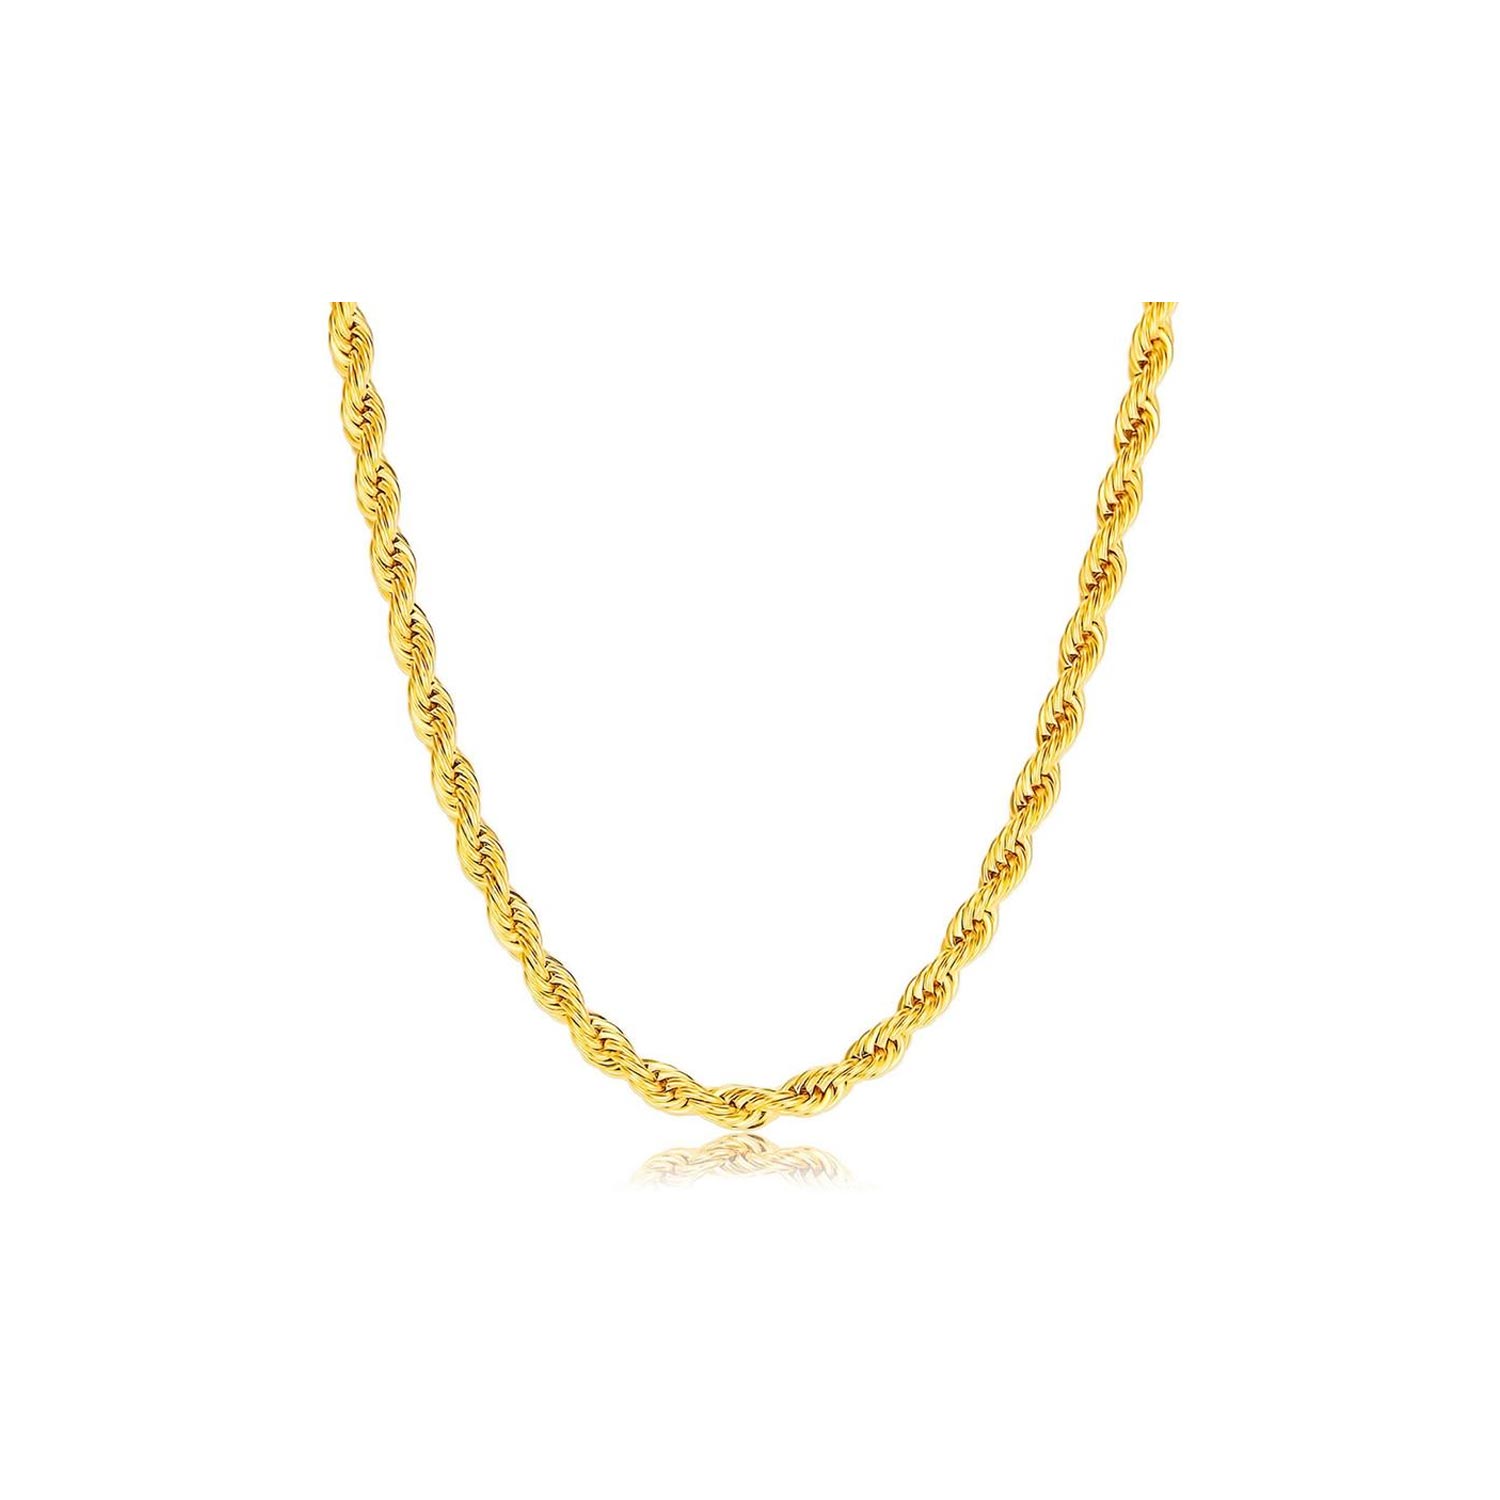 Italian 10K Gold 4MM Rope Chain Necklace